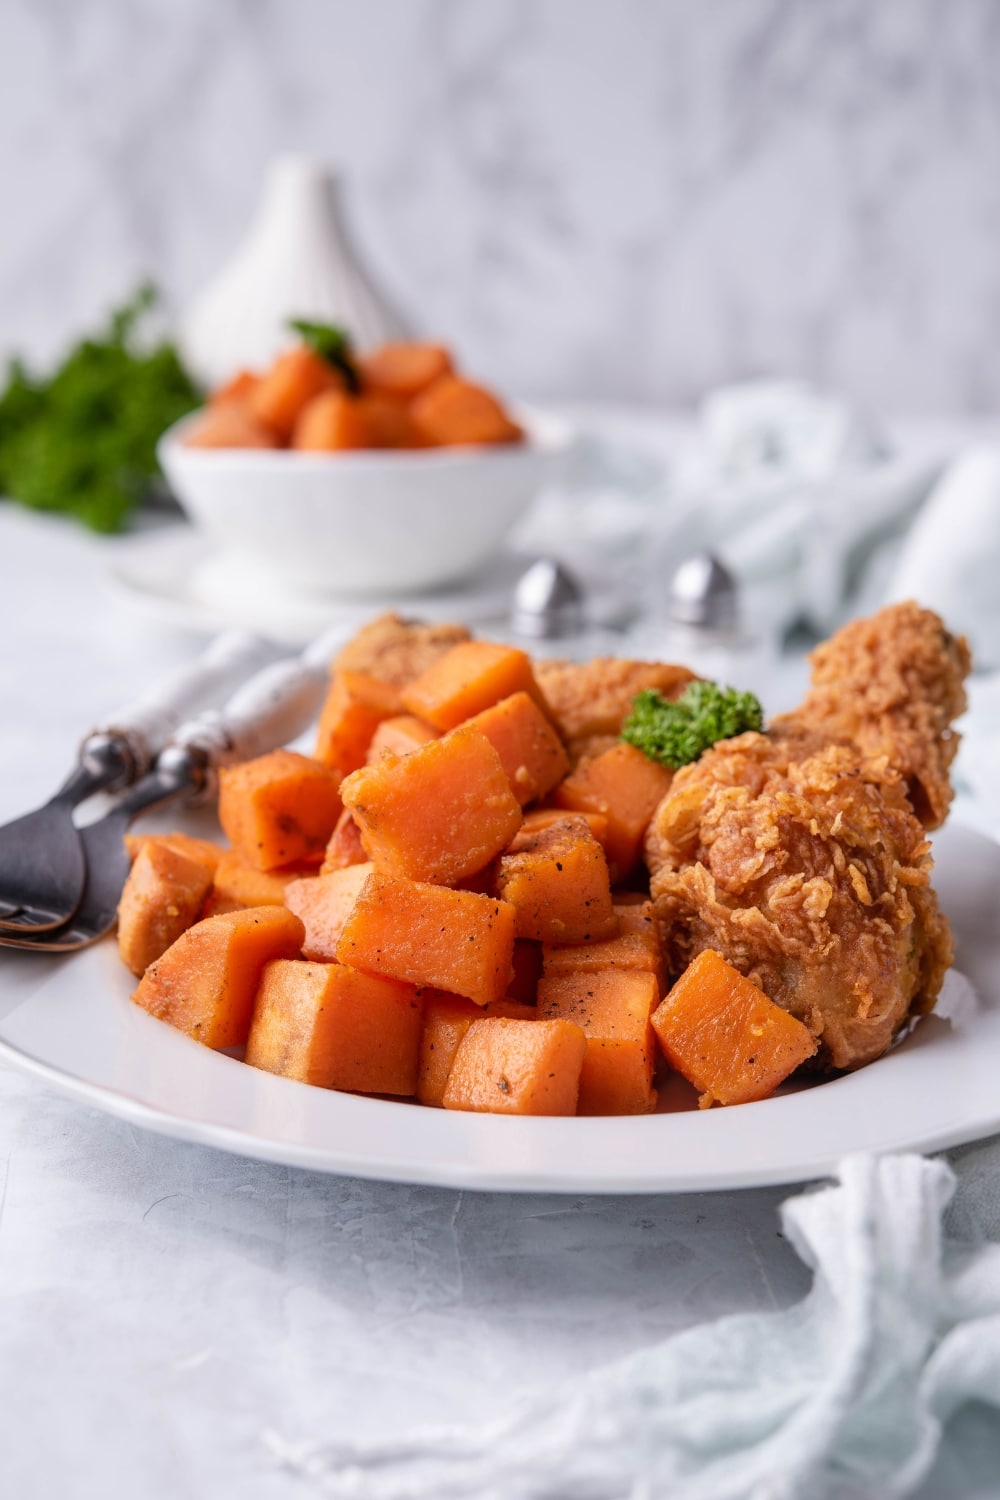 Sauteed sweet potatoes on a plate served with fried chicken drumsticks. Two forks with white handles are on the plate and behind is a small bowl with more sauteed sweet potato cubes and a pair of salt and pepper shakers.